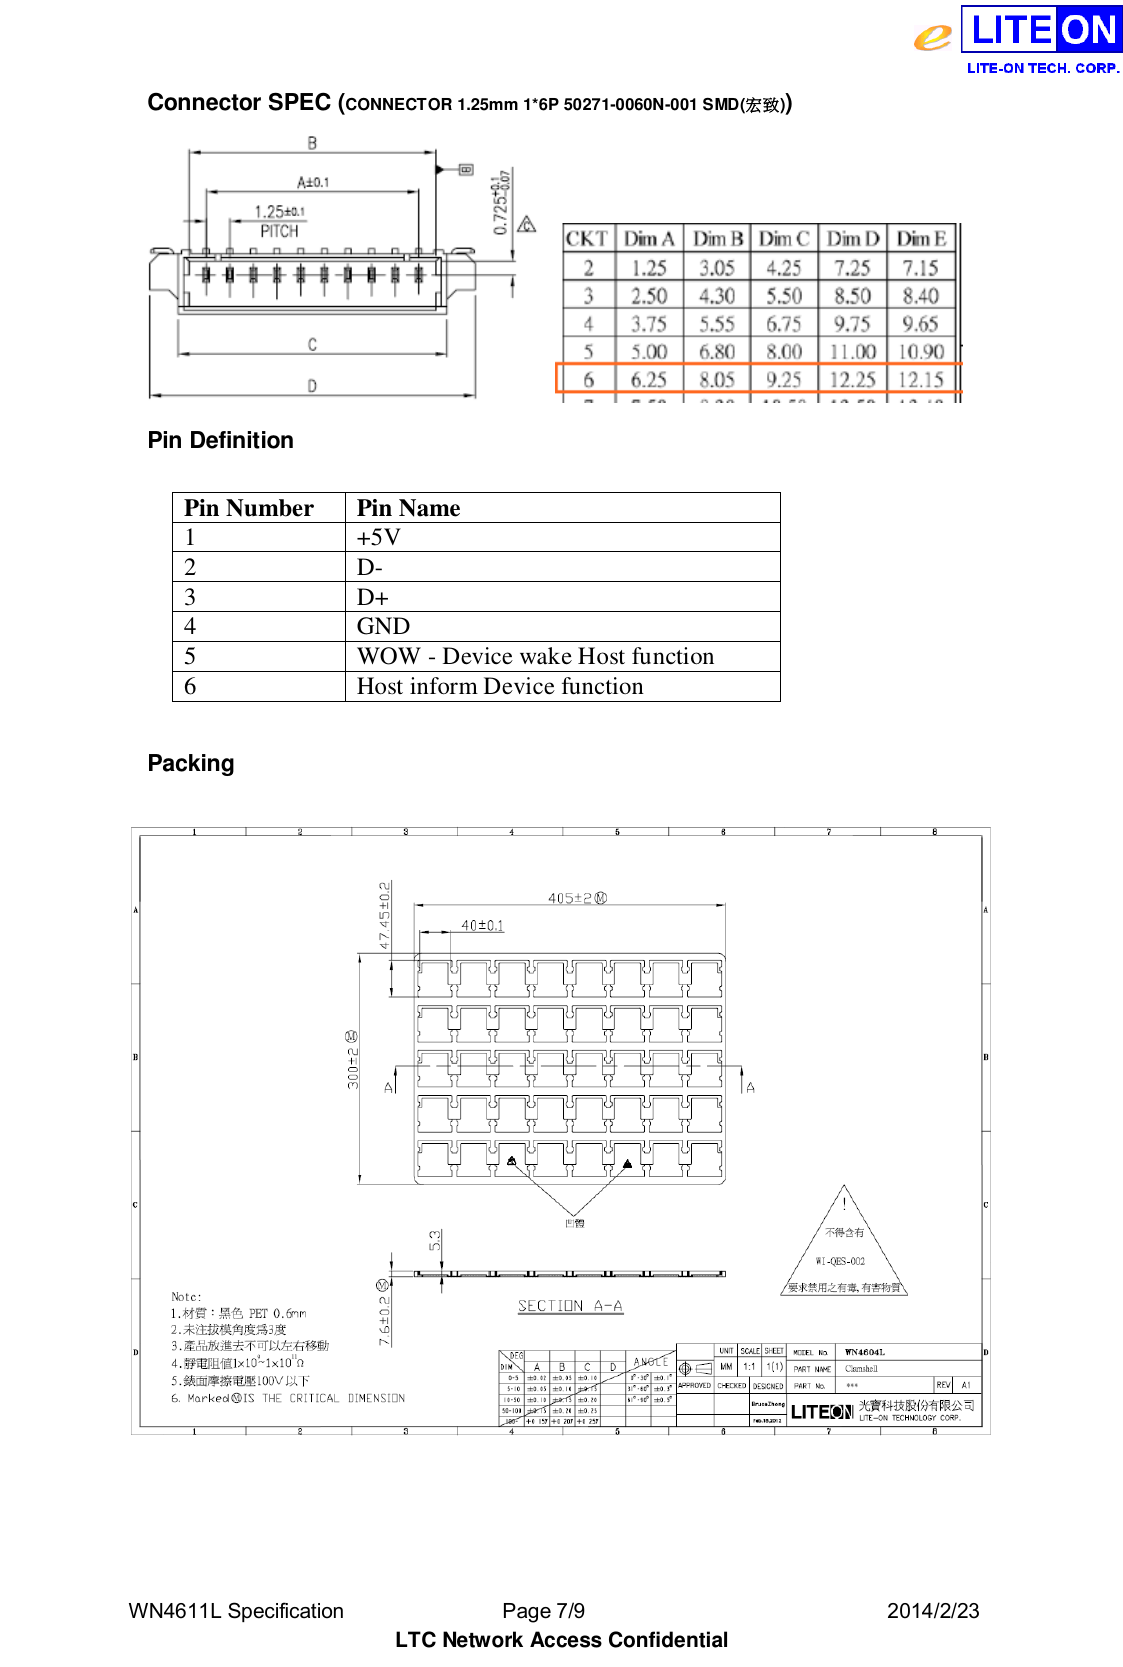  WN4611L Specification               Page 7/9                              2014/2/23 LTC Network Access Confidential Connector SPEC (CONNECTOR 1.25mm 1*6P 50271-0060N-001 SMD(宏致))  Pin Definition  Pin Number Pin Name 1 +5V 2 D- 3 D+ 4 GND 5 WOW - Device wake Host function 6 Host inform Device function  Packing   